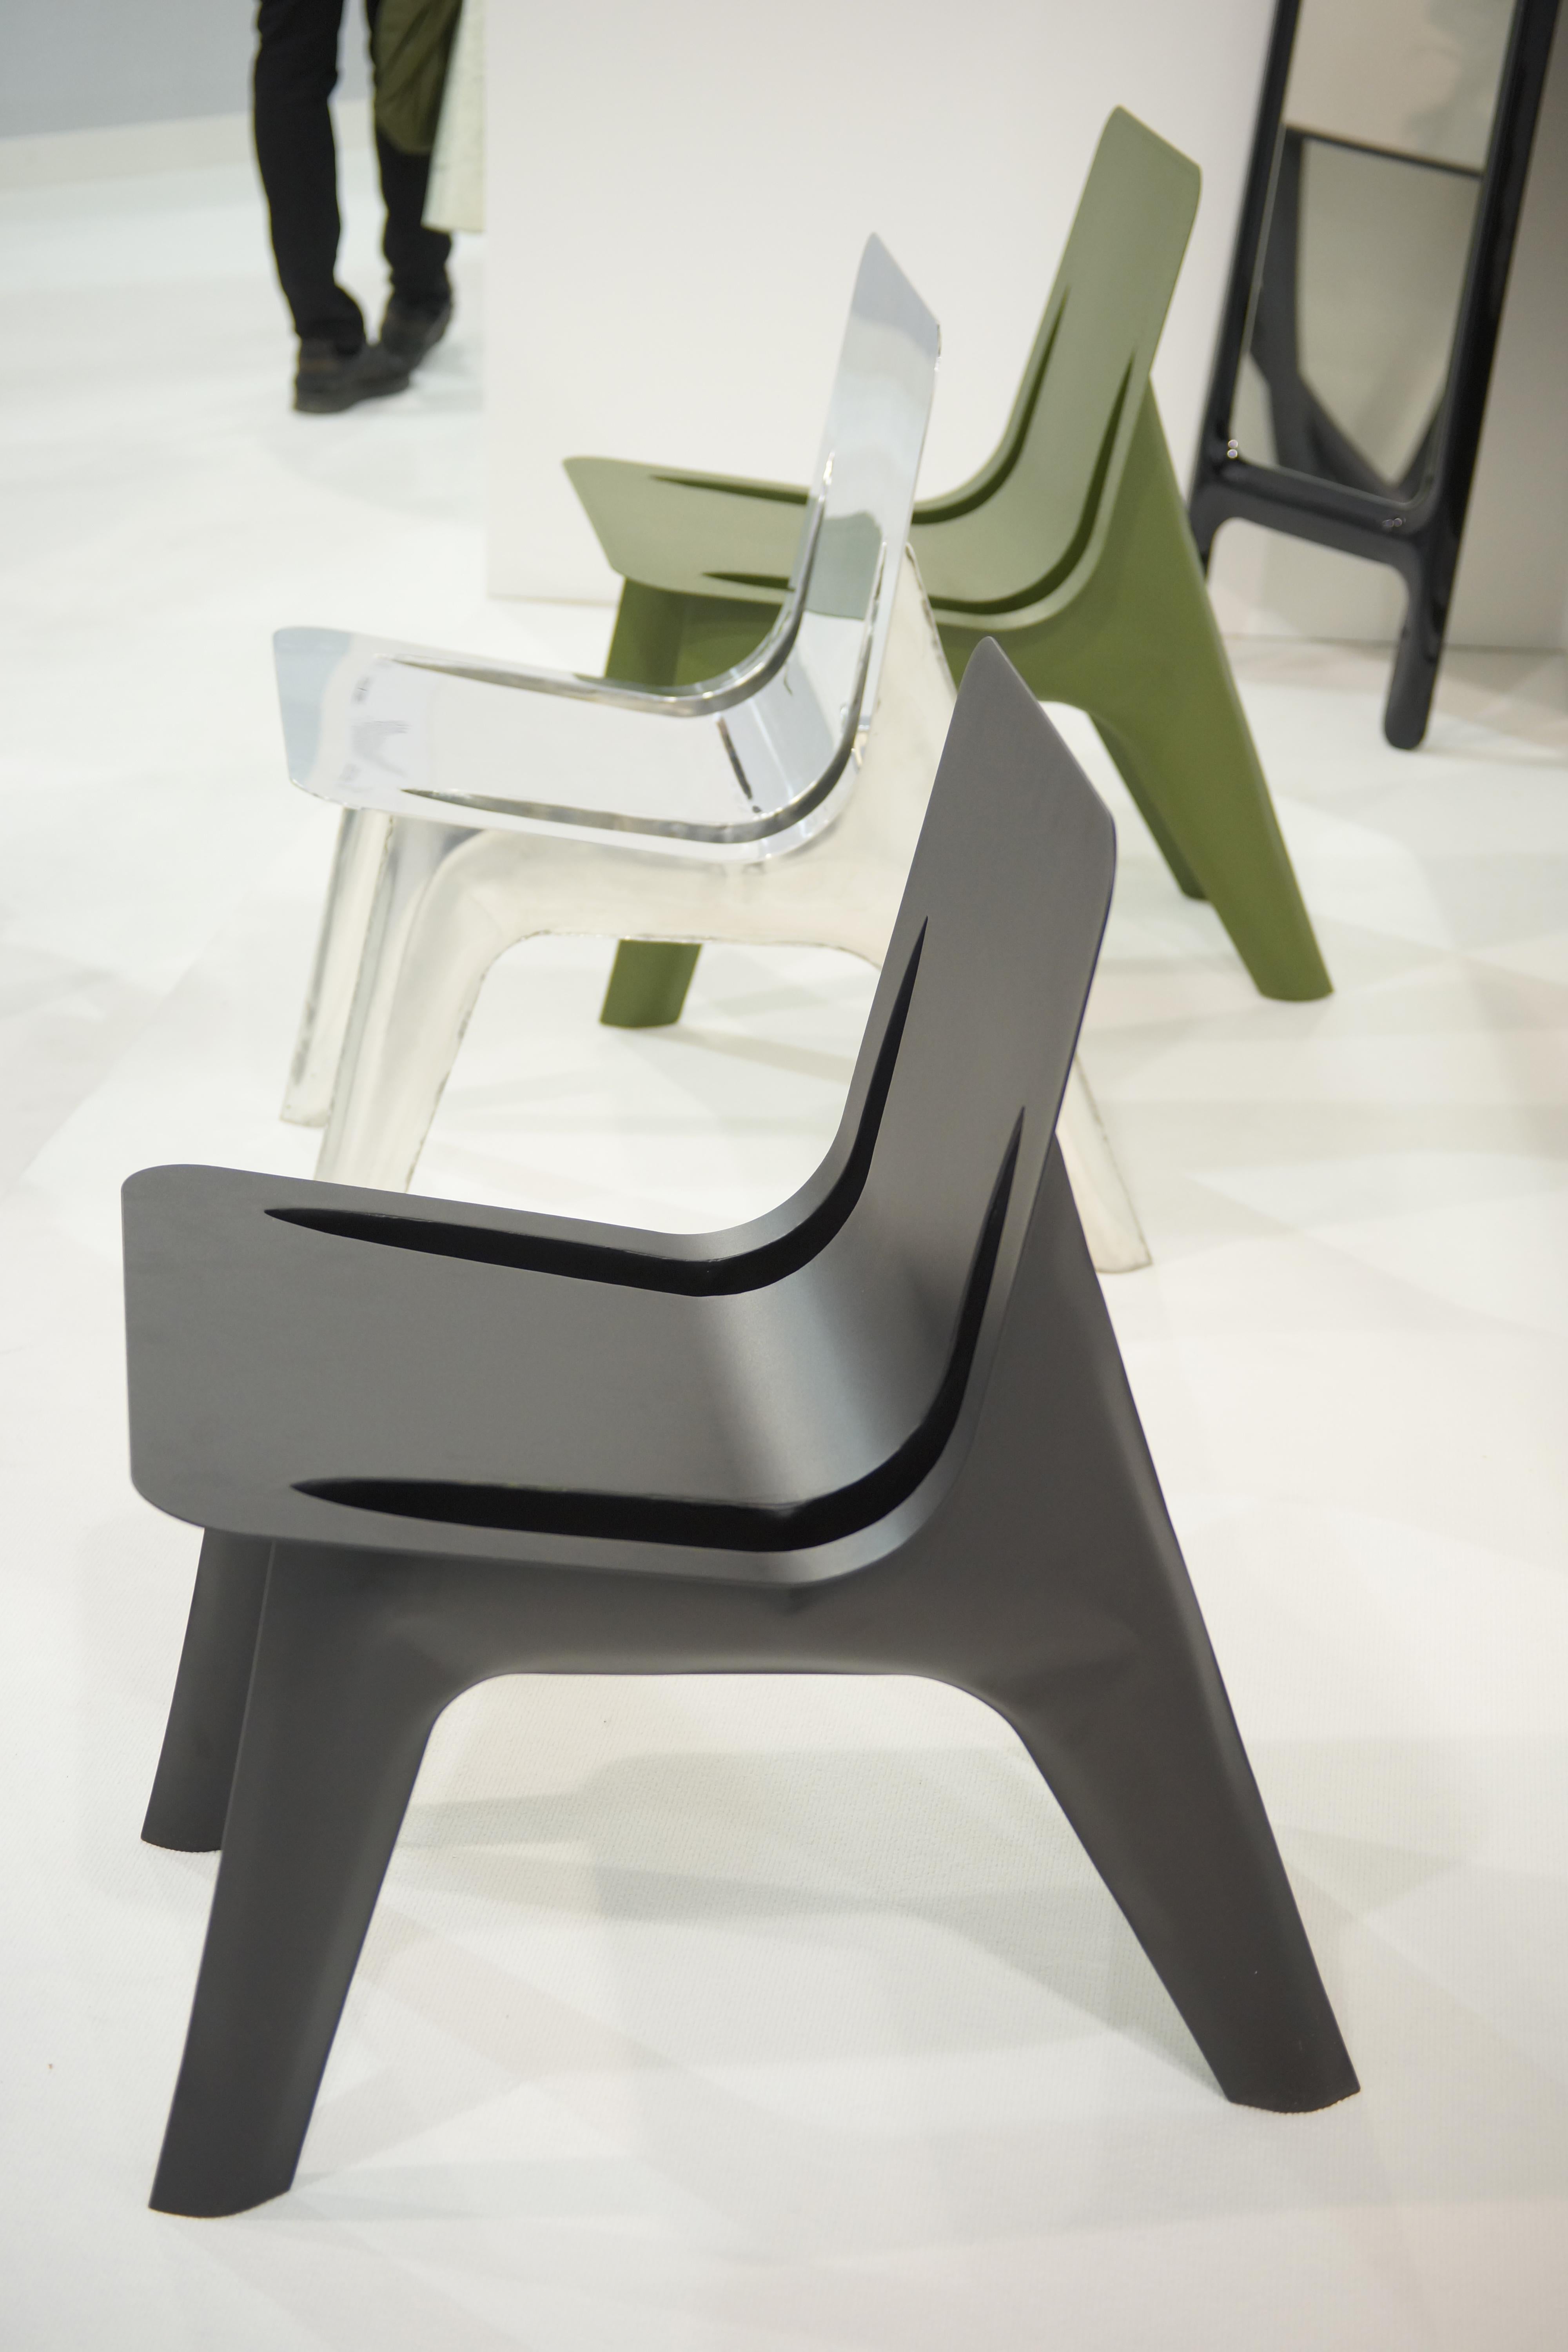 J-Chair Lounge Polished Olive Green Color Aluminum Seating by Zieta In New Condition For Sale In Beverly Hills, CA